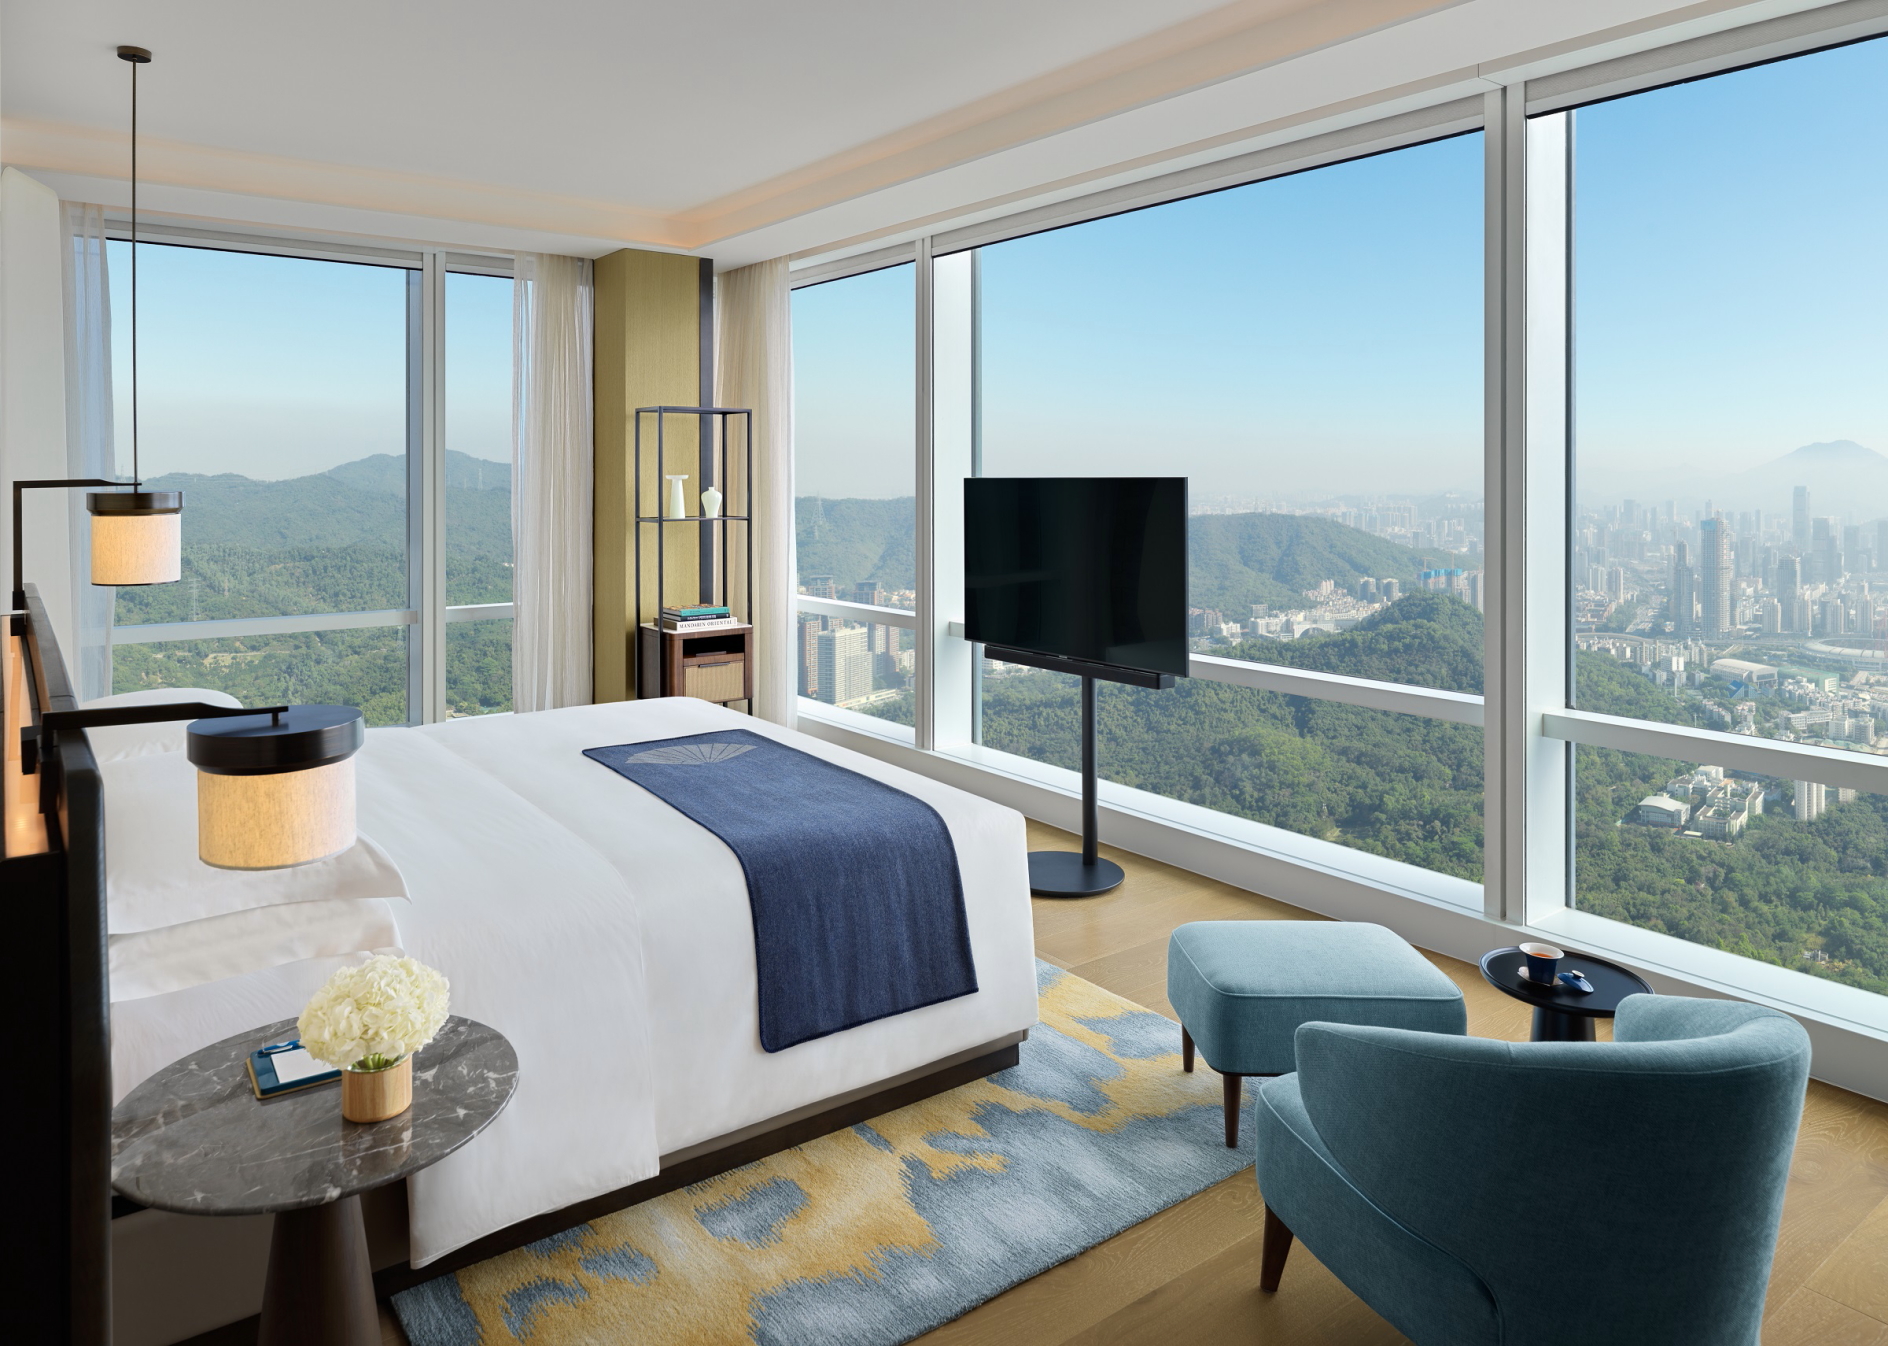 Deluxe View Room at the Mandarin Oriental, Shenzhen. Click to enlarge.